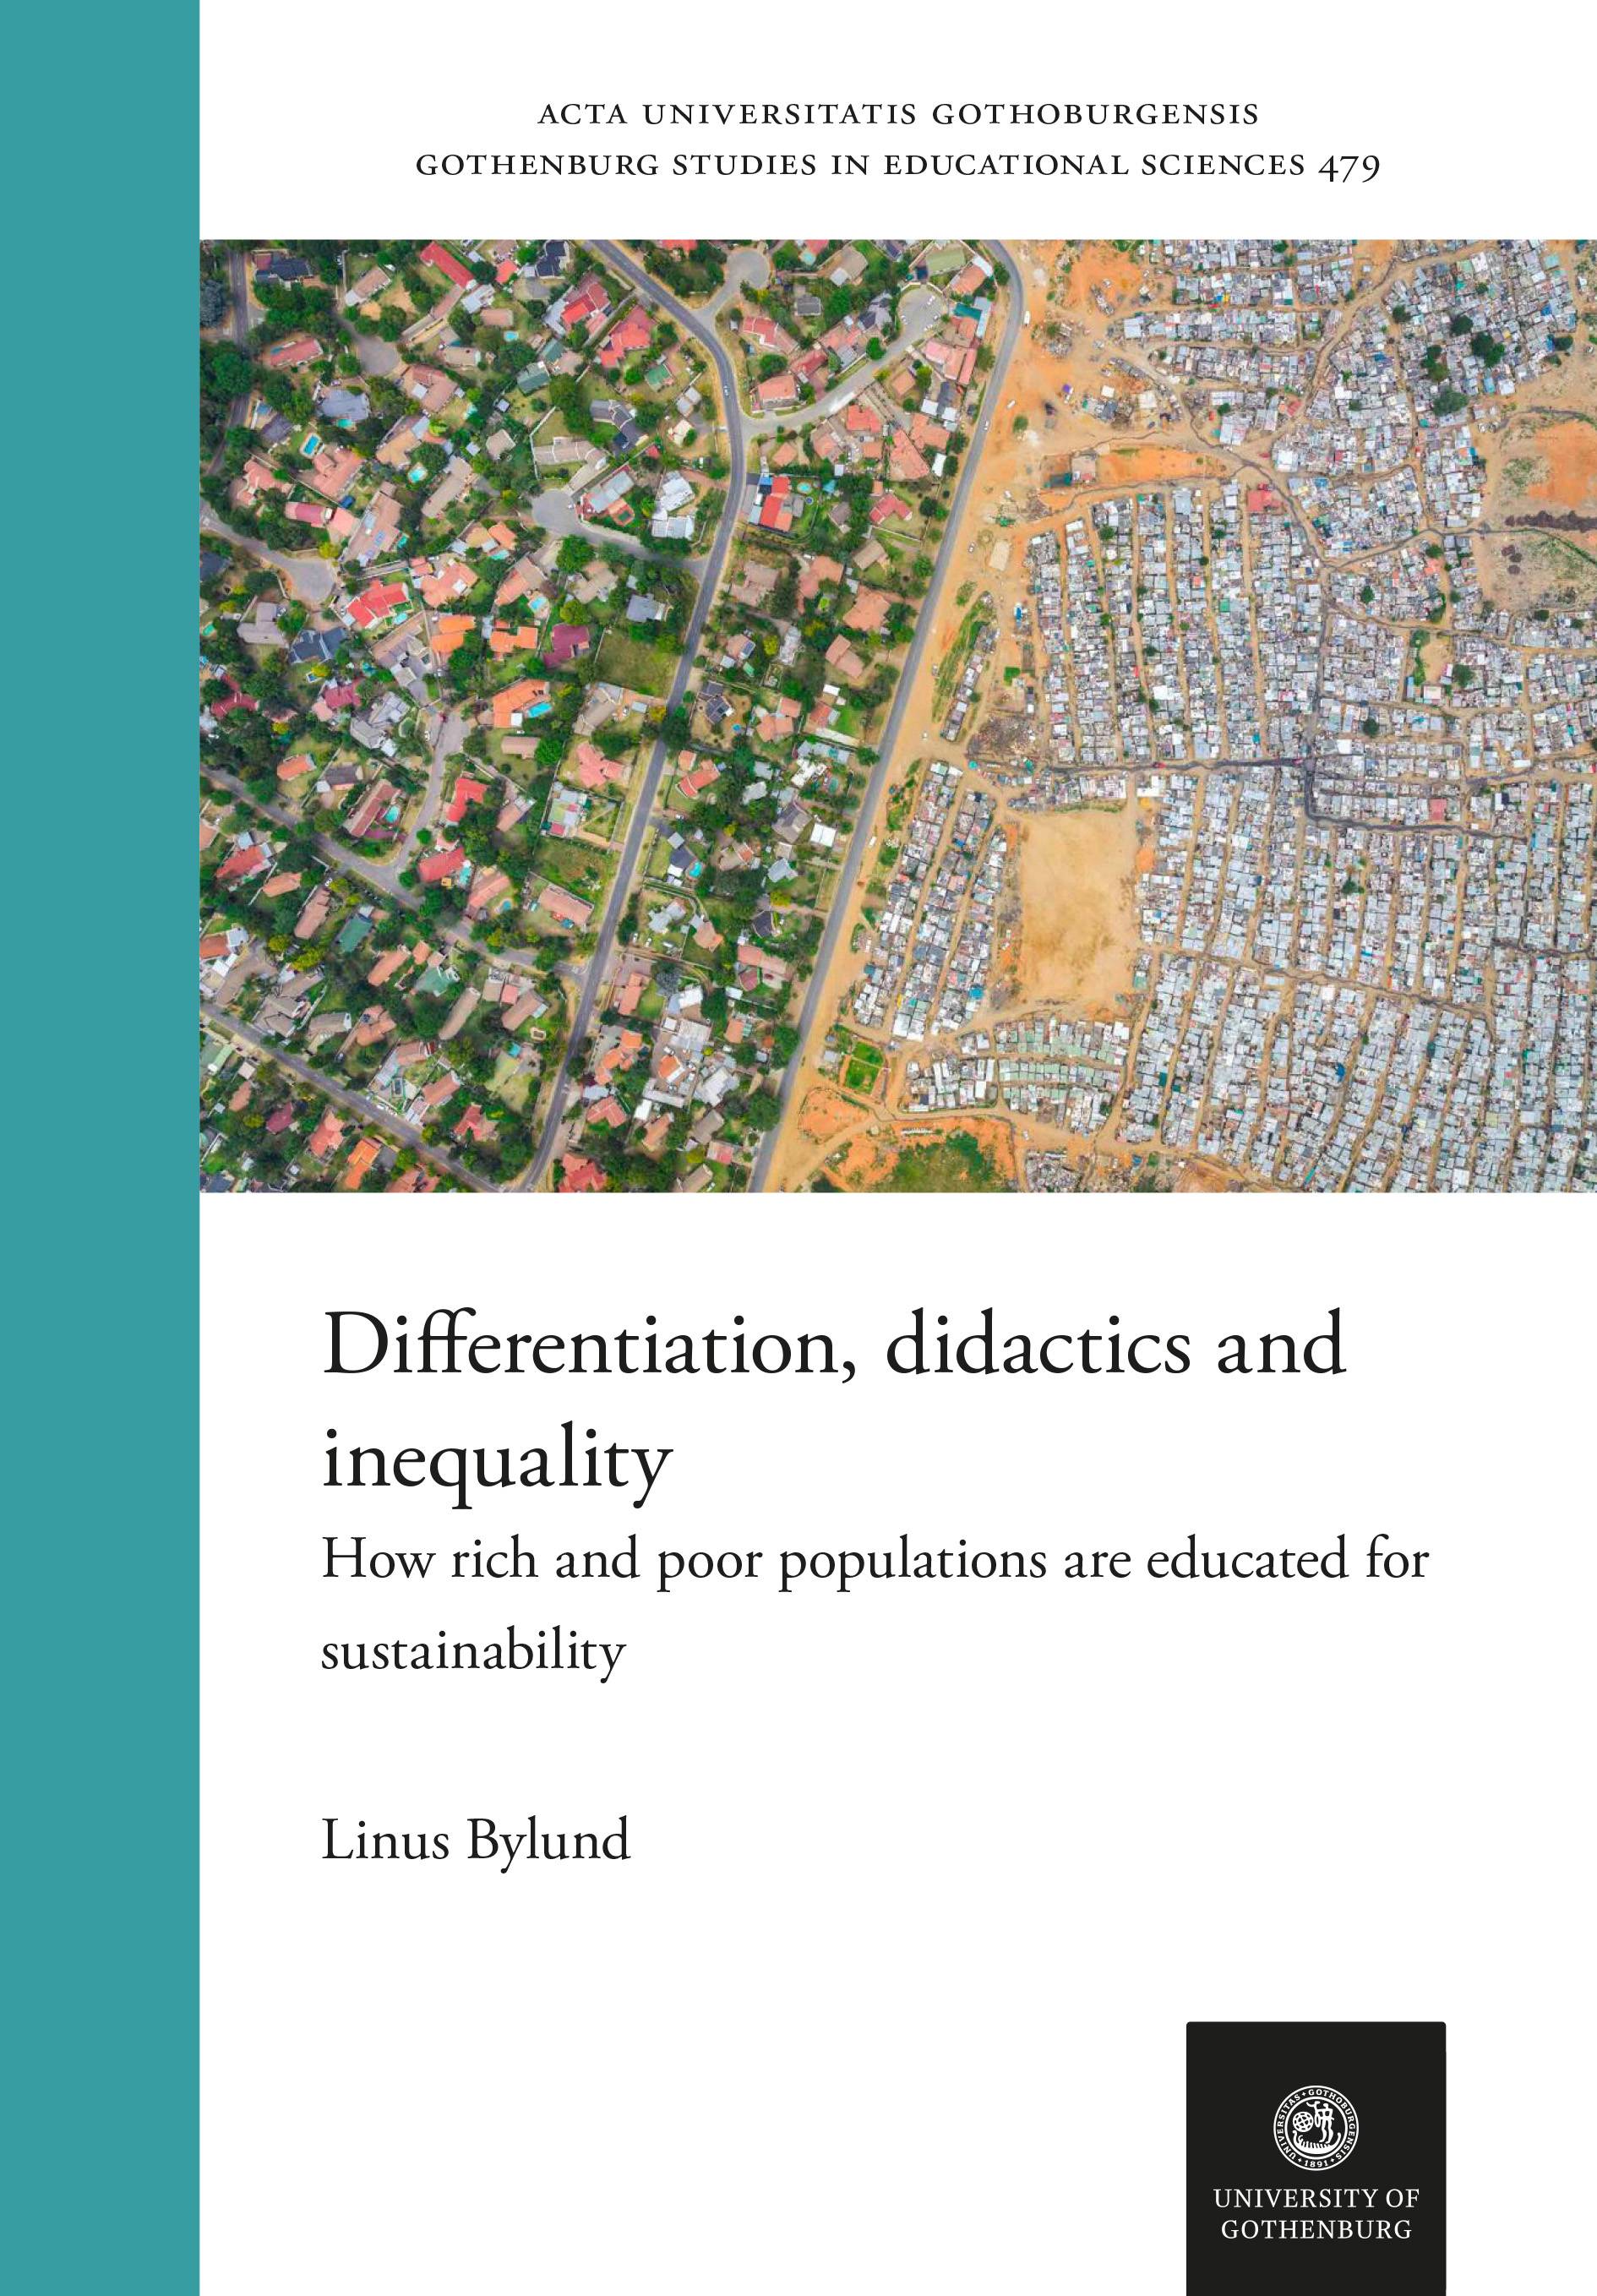 Differentiation, didactics and inequality: How rich and poor populations are educated for sustainability